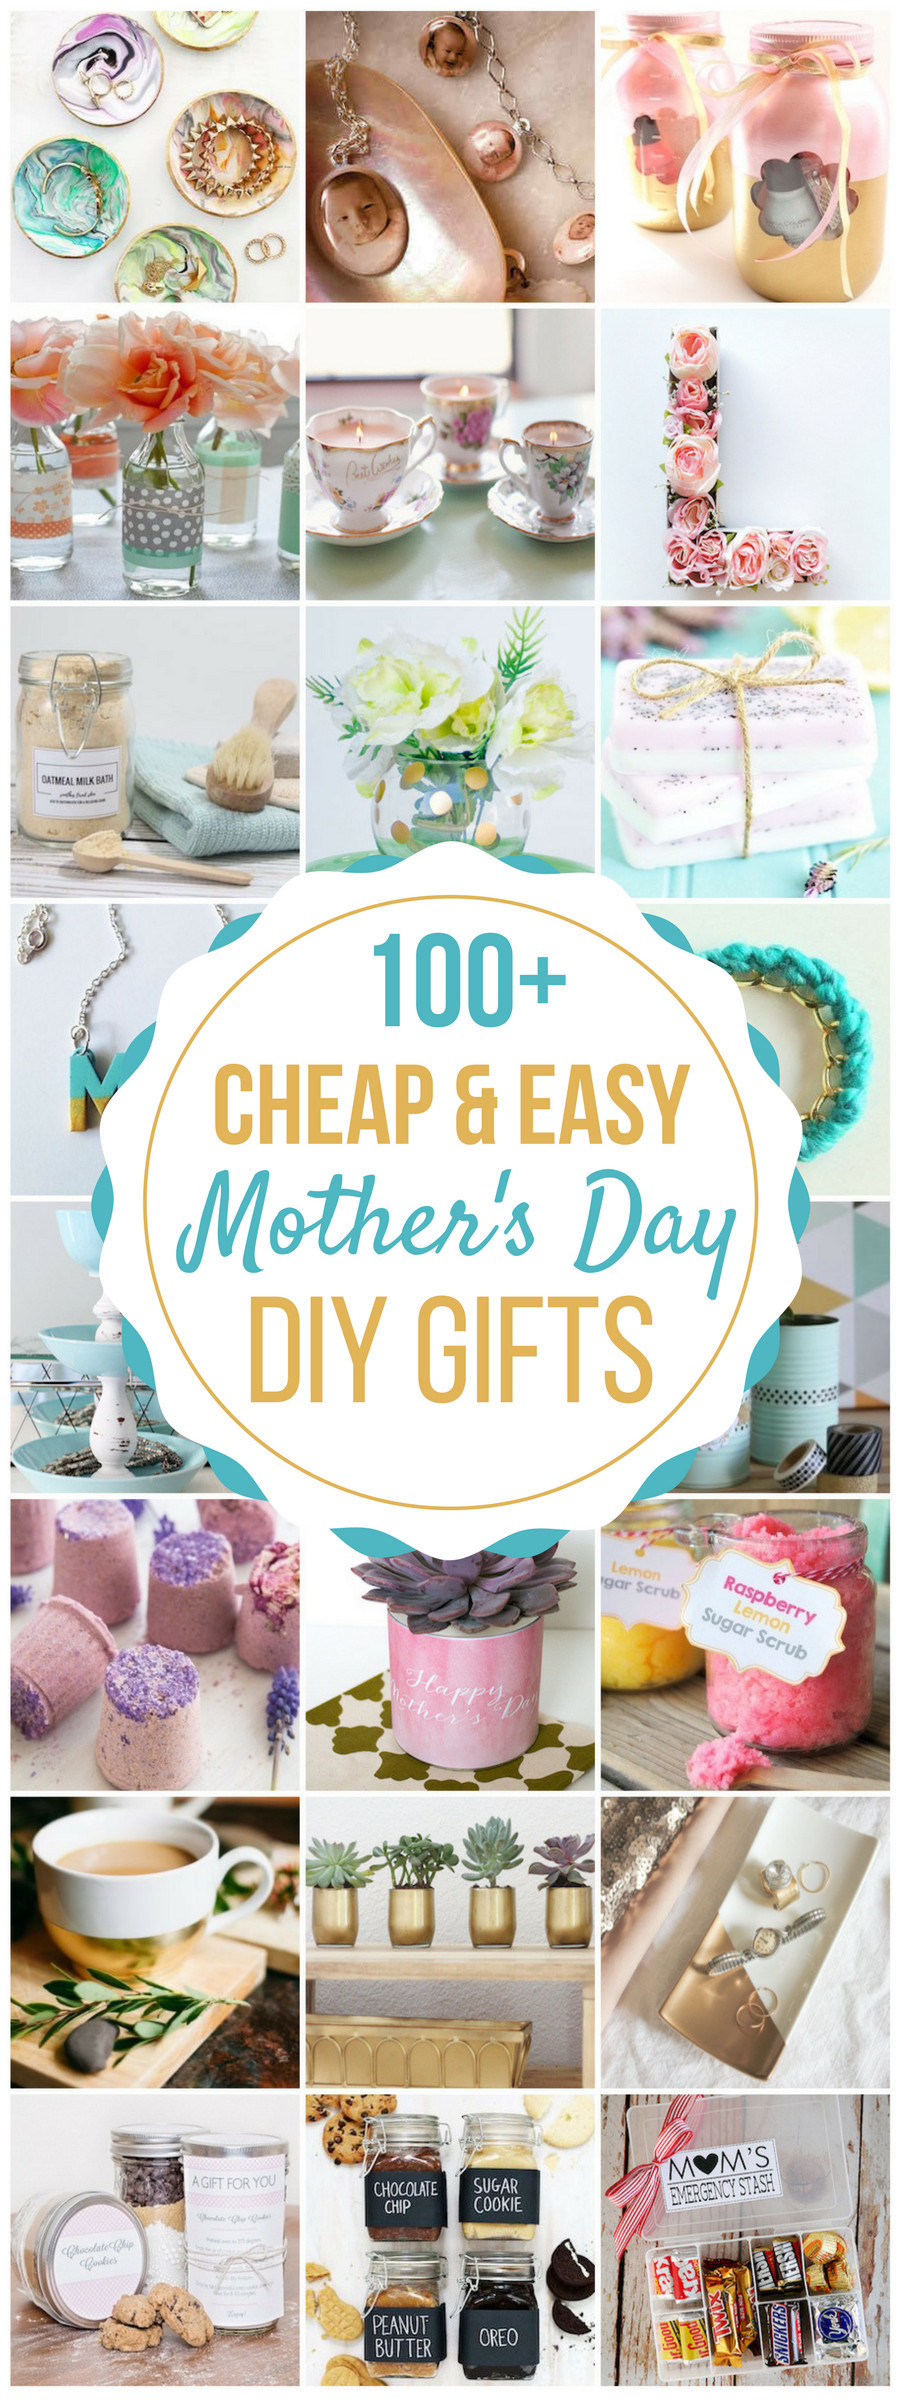 Cheap Mother's Day Gifts
 100 Cheap & Easy DIY Mother s Day Gifts Prudent Penny